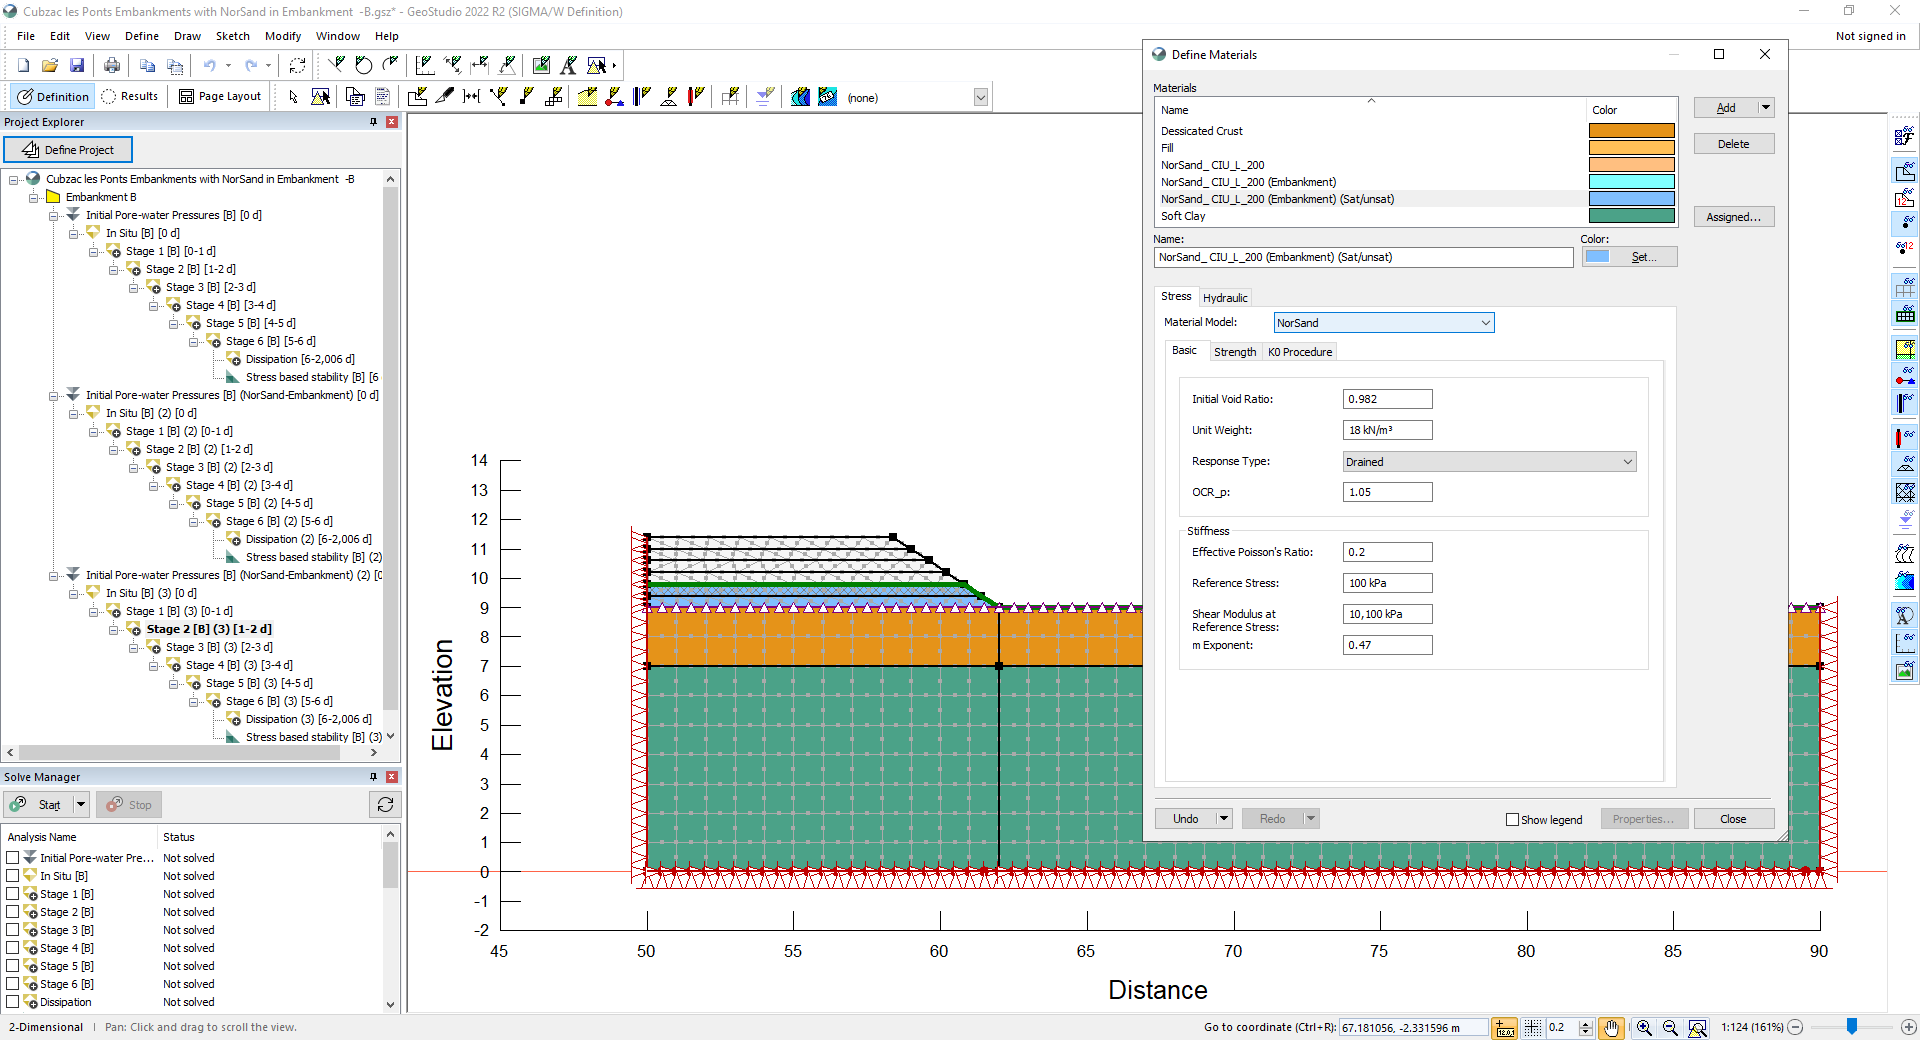 Working with GEO-SLOPE GeoStudio 2022.1 v11.4.1.212 full license